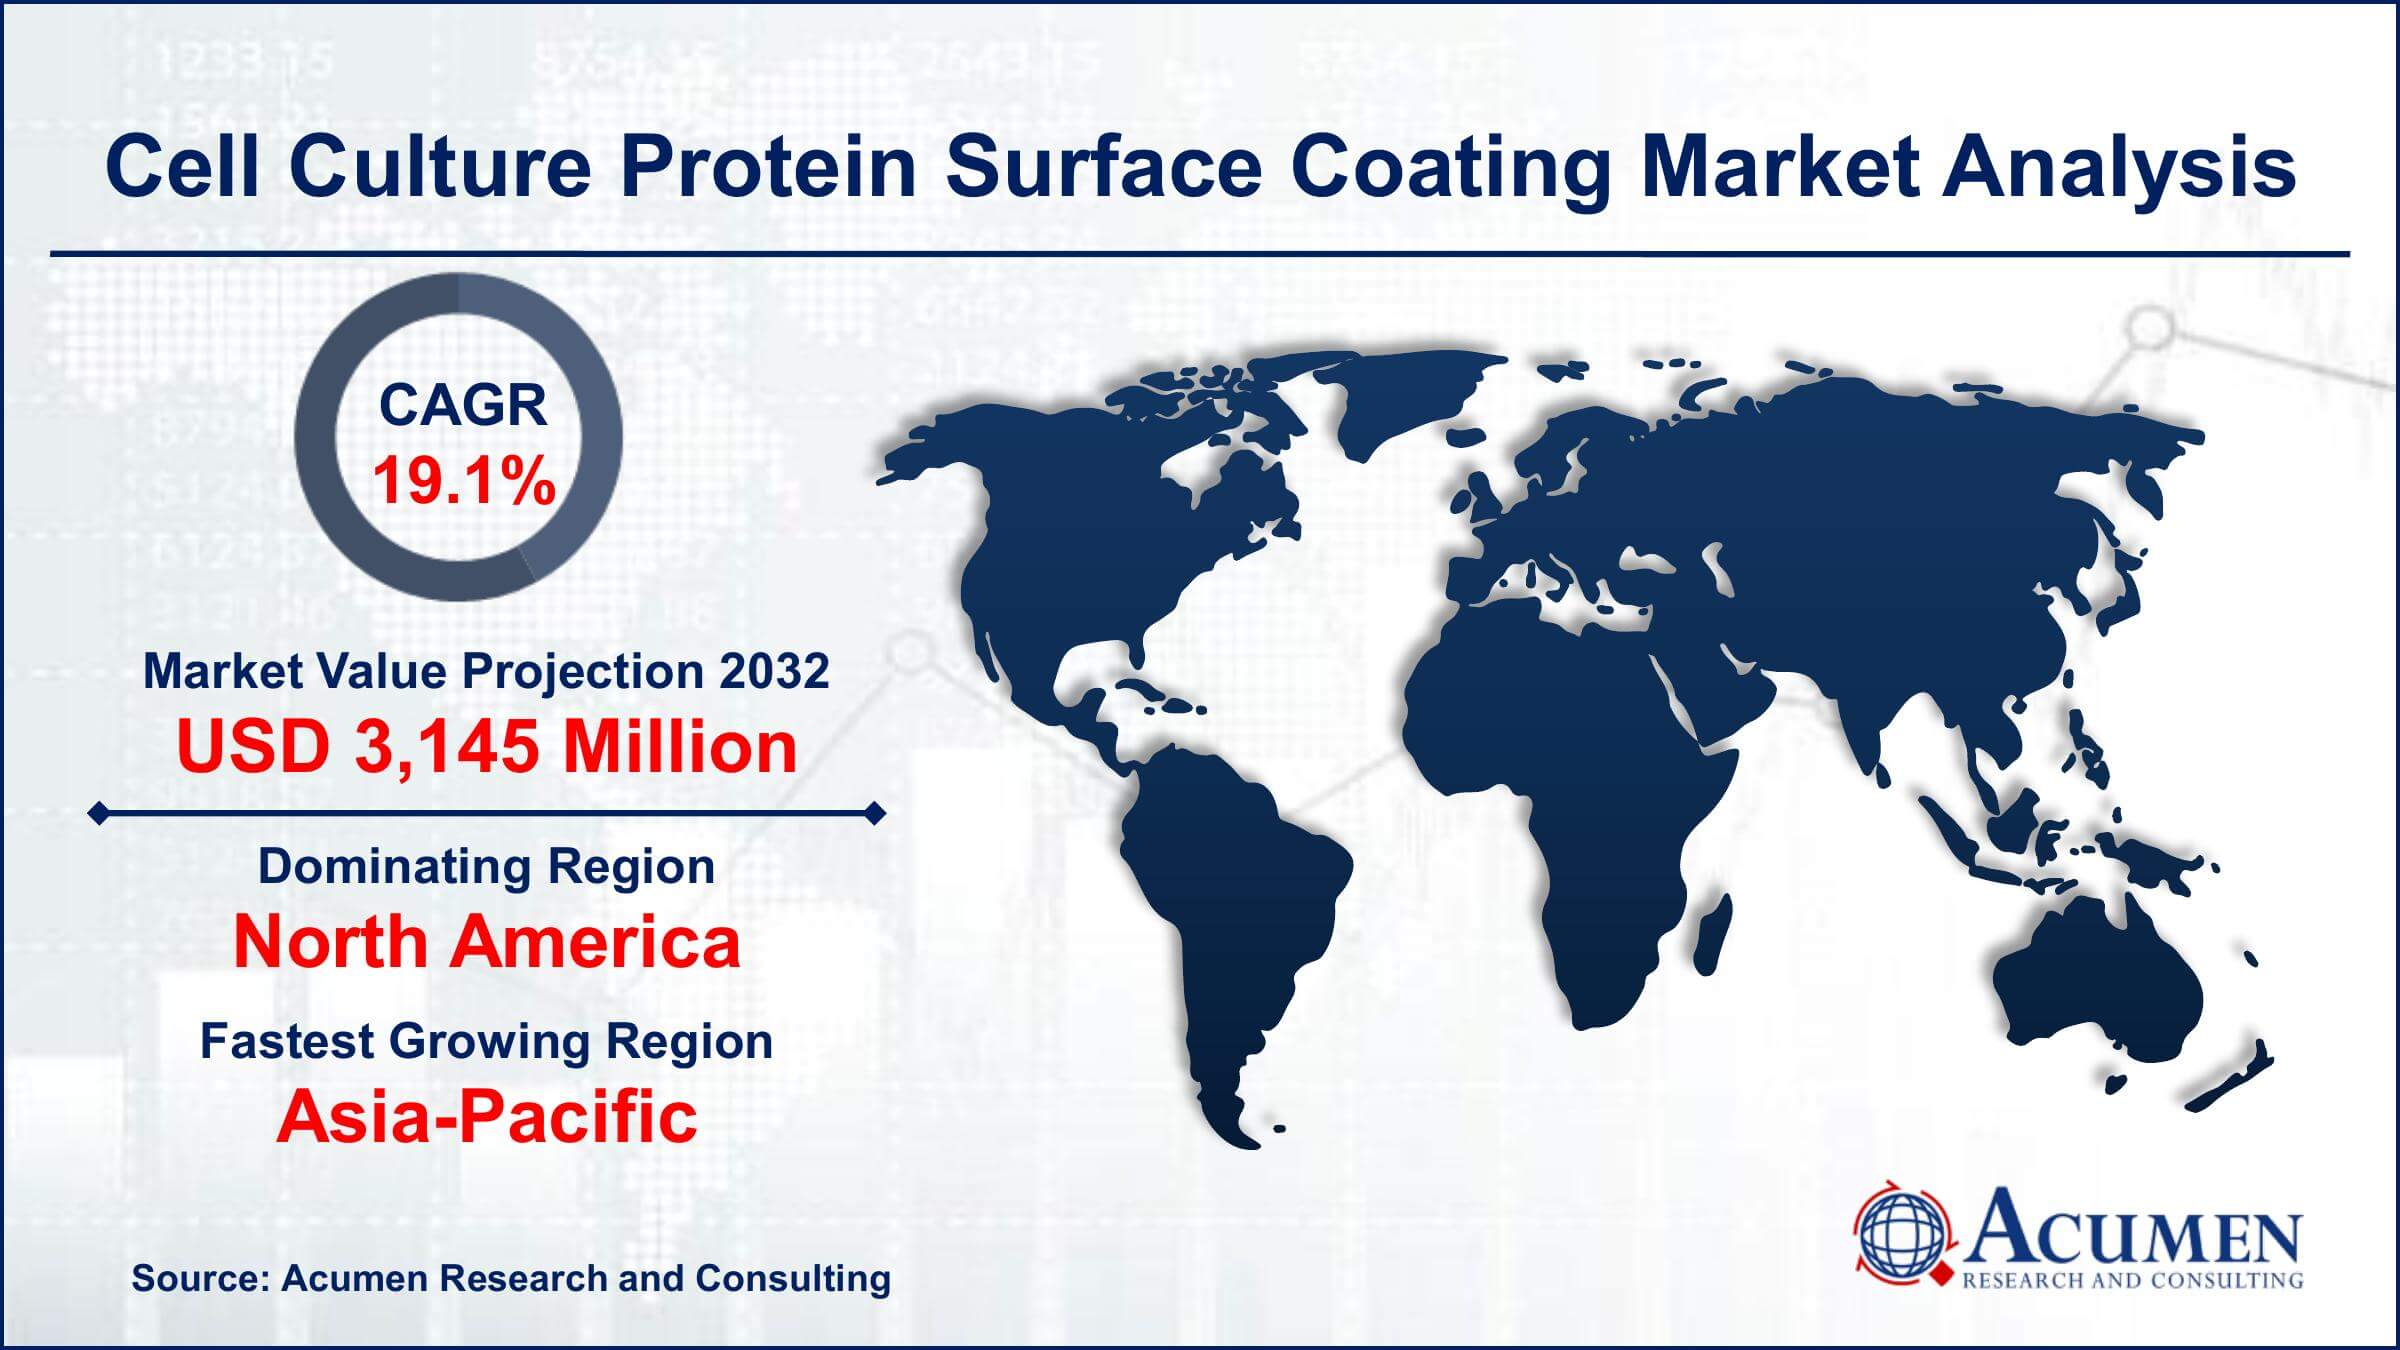 Global Cell Culture Protein Surface Coating Market Trends